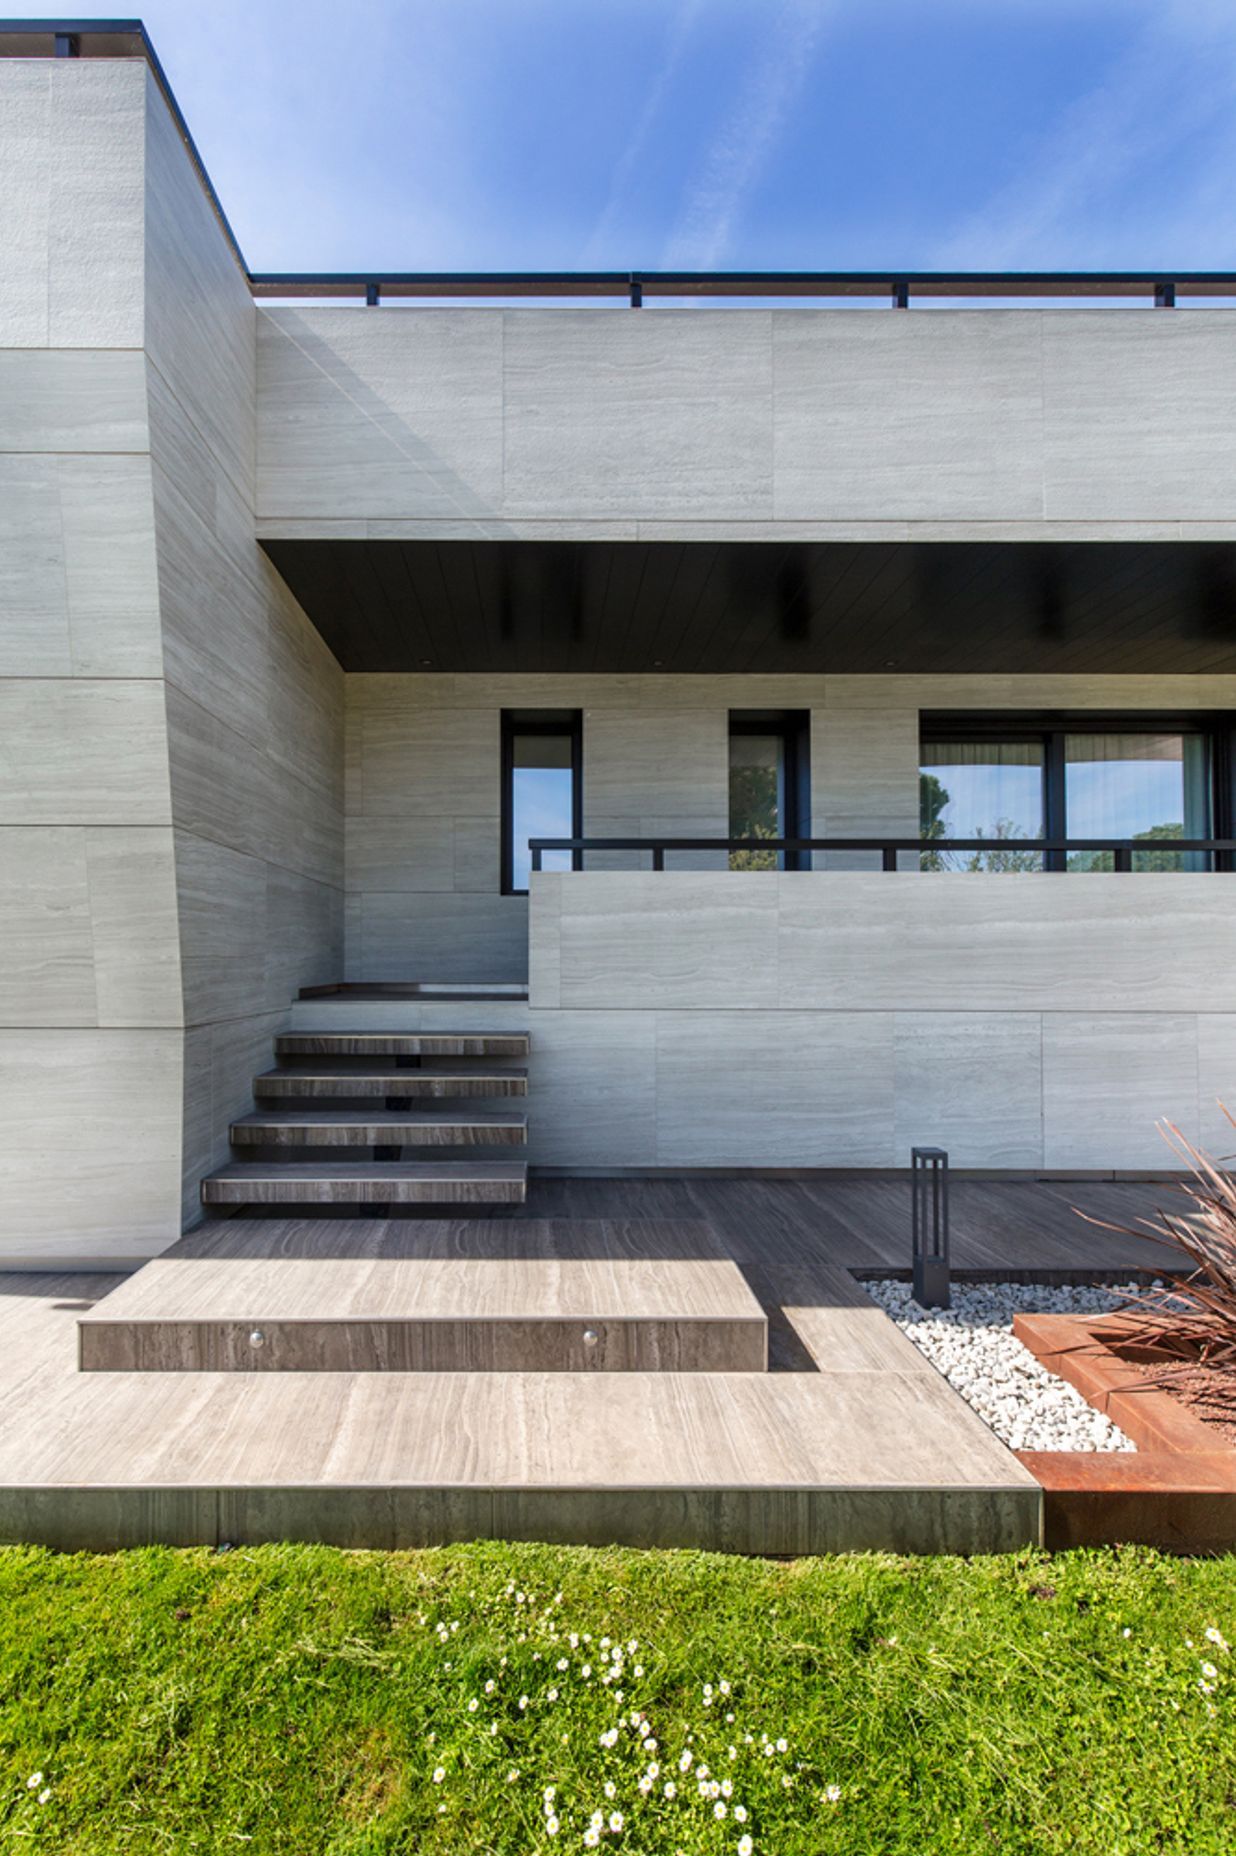 Neolith Strata Argentum façade. A single-family home in Madrid.